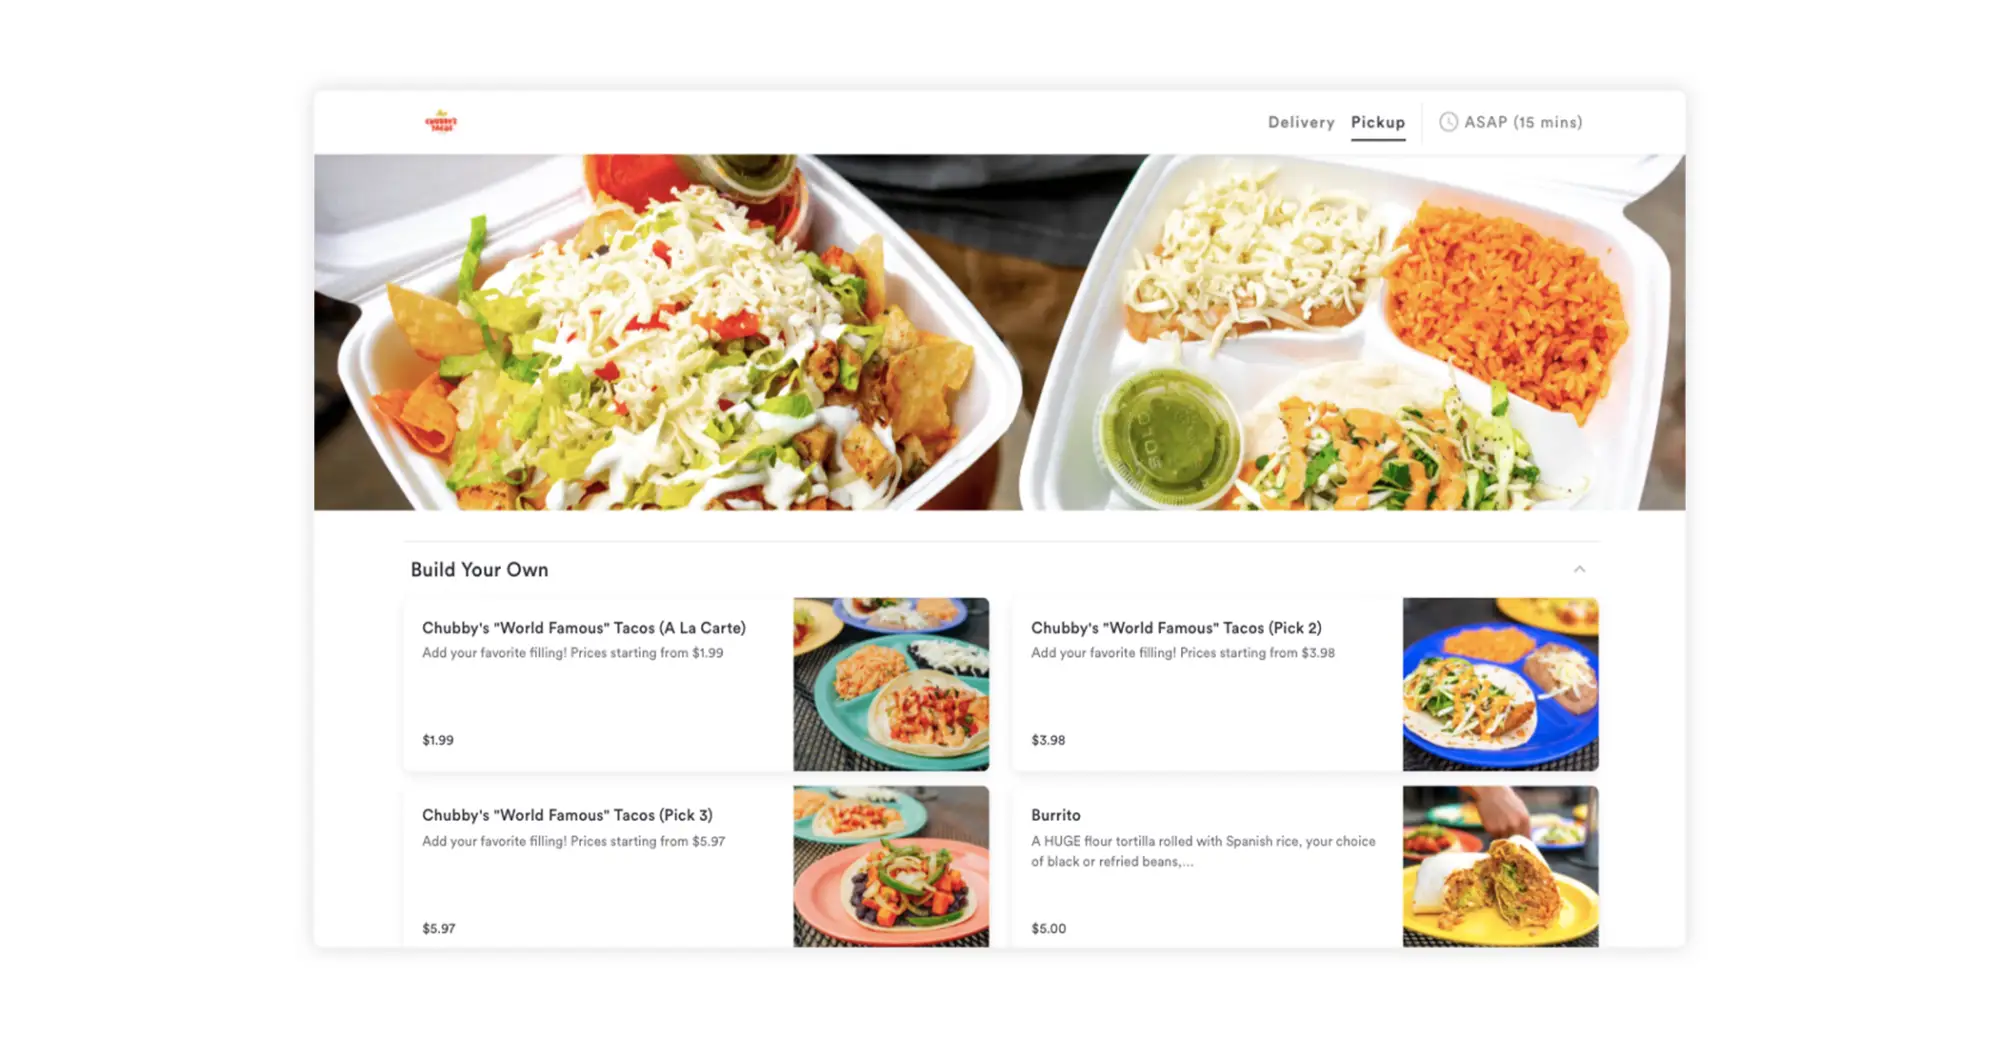 Chubby’s Tacos include images for each menu item